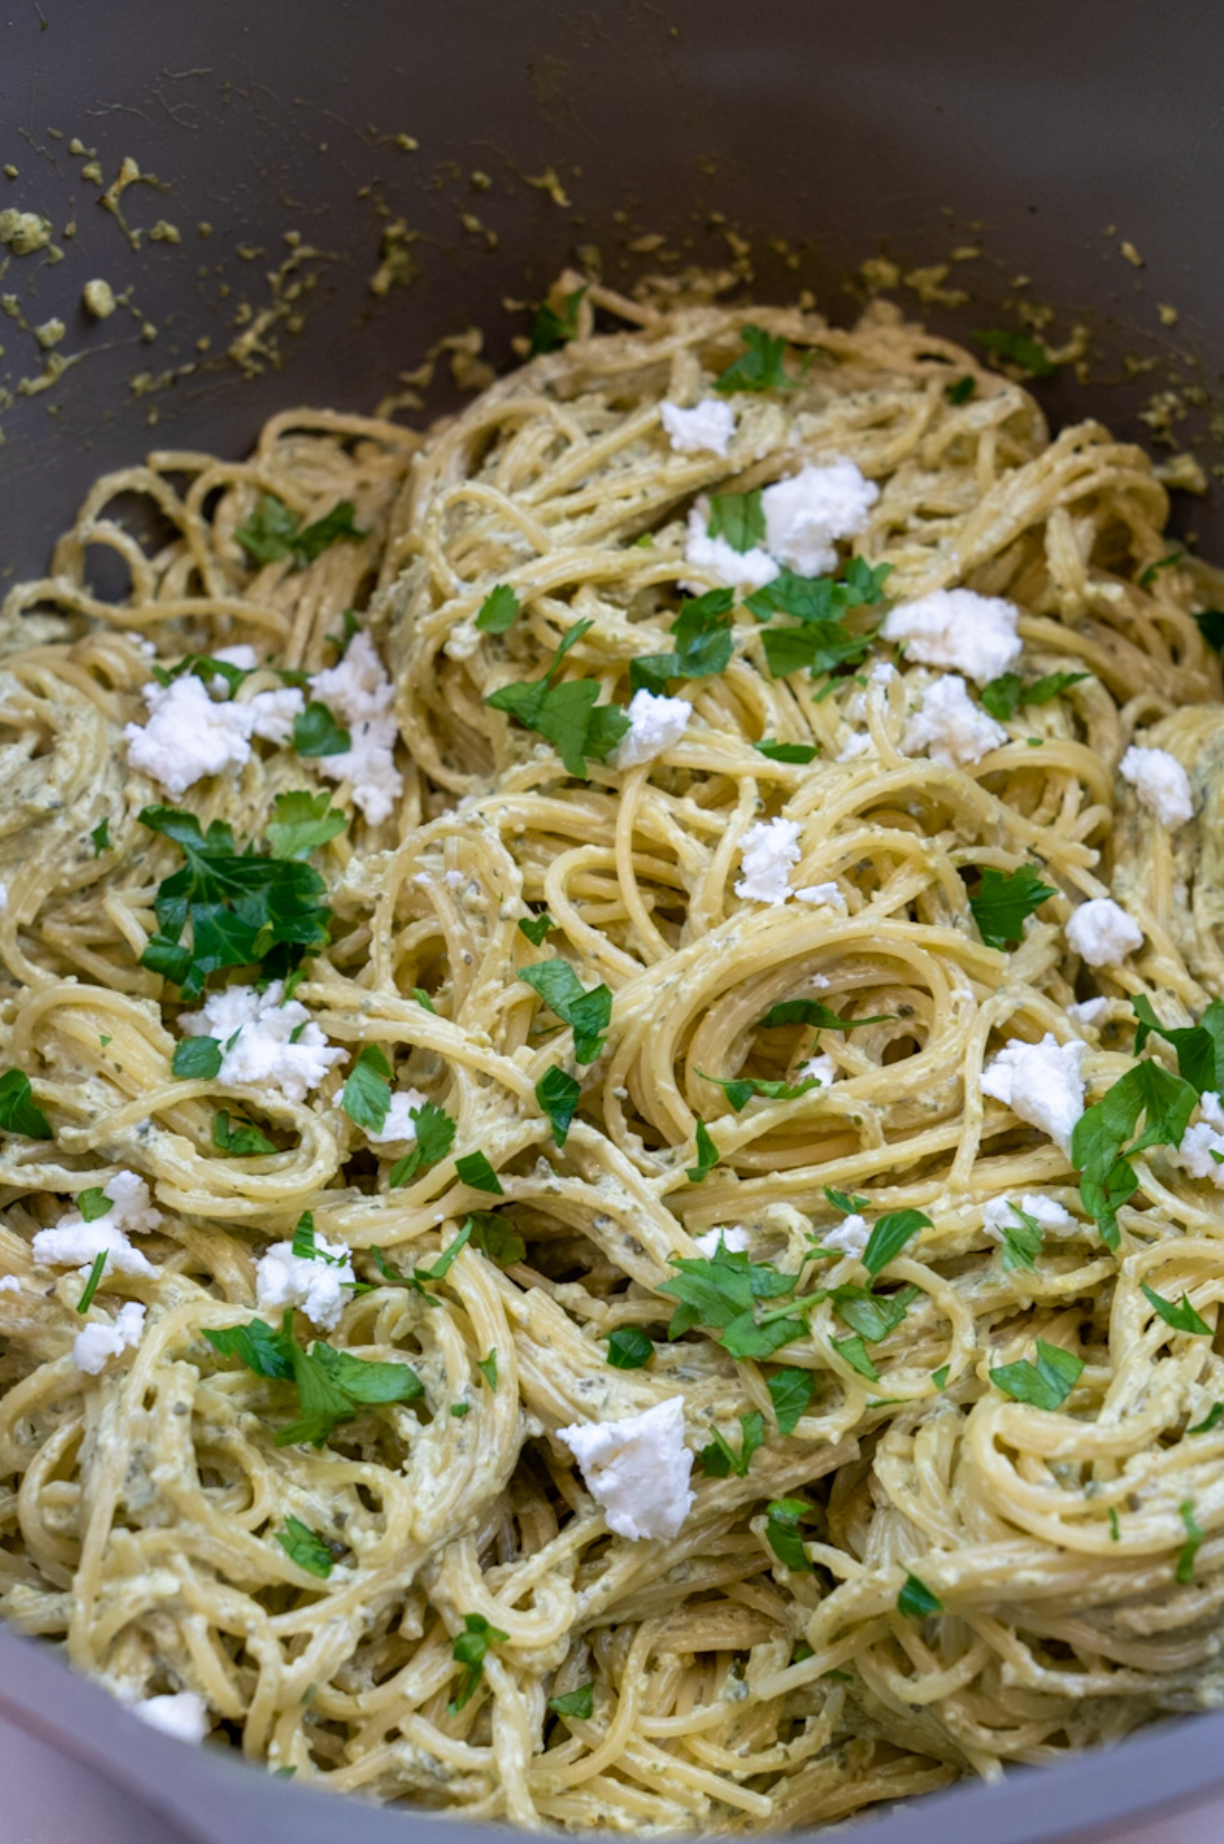 30 Pasta Recipes To Make For Easy Weeknight Dinners - Brit + Co